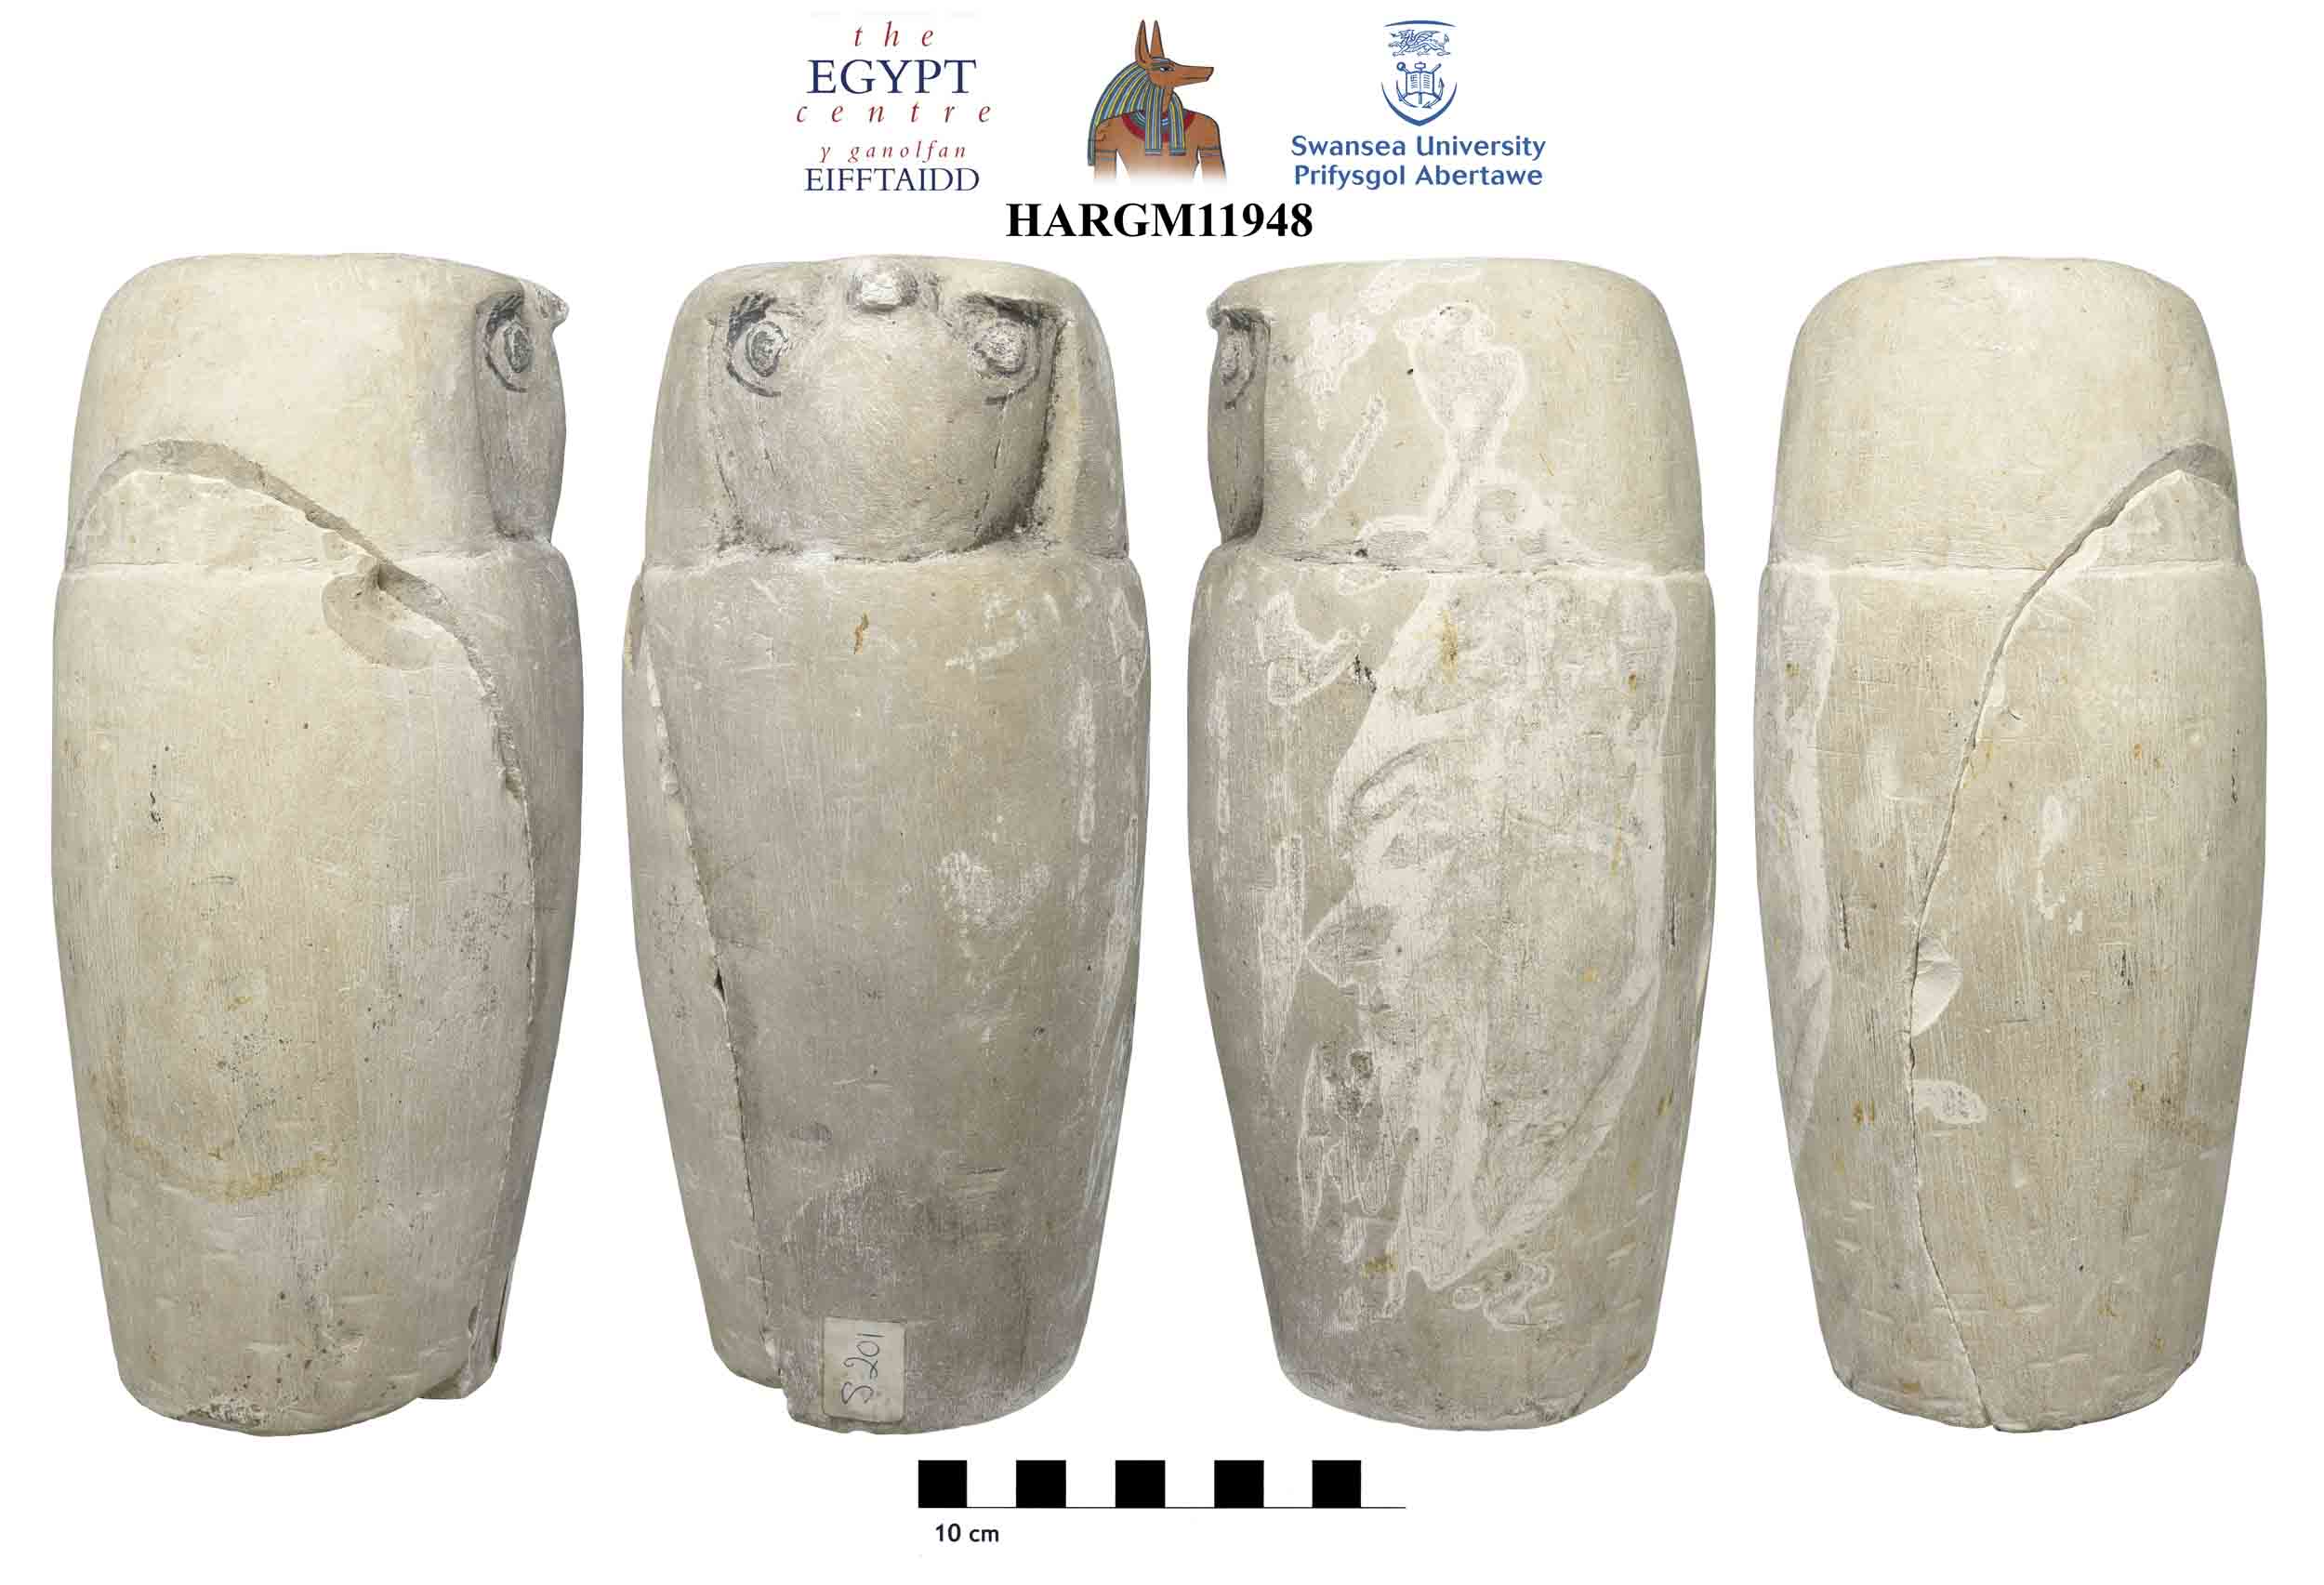 Image for: Dummy Canopic Jar